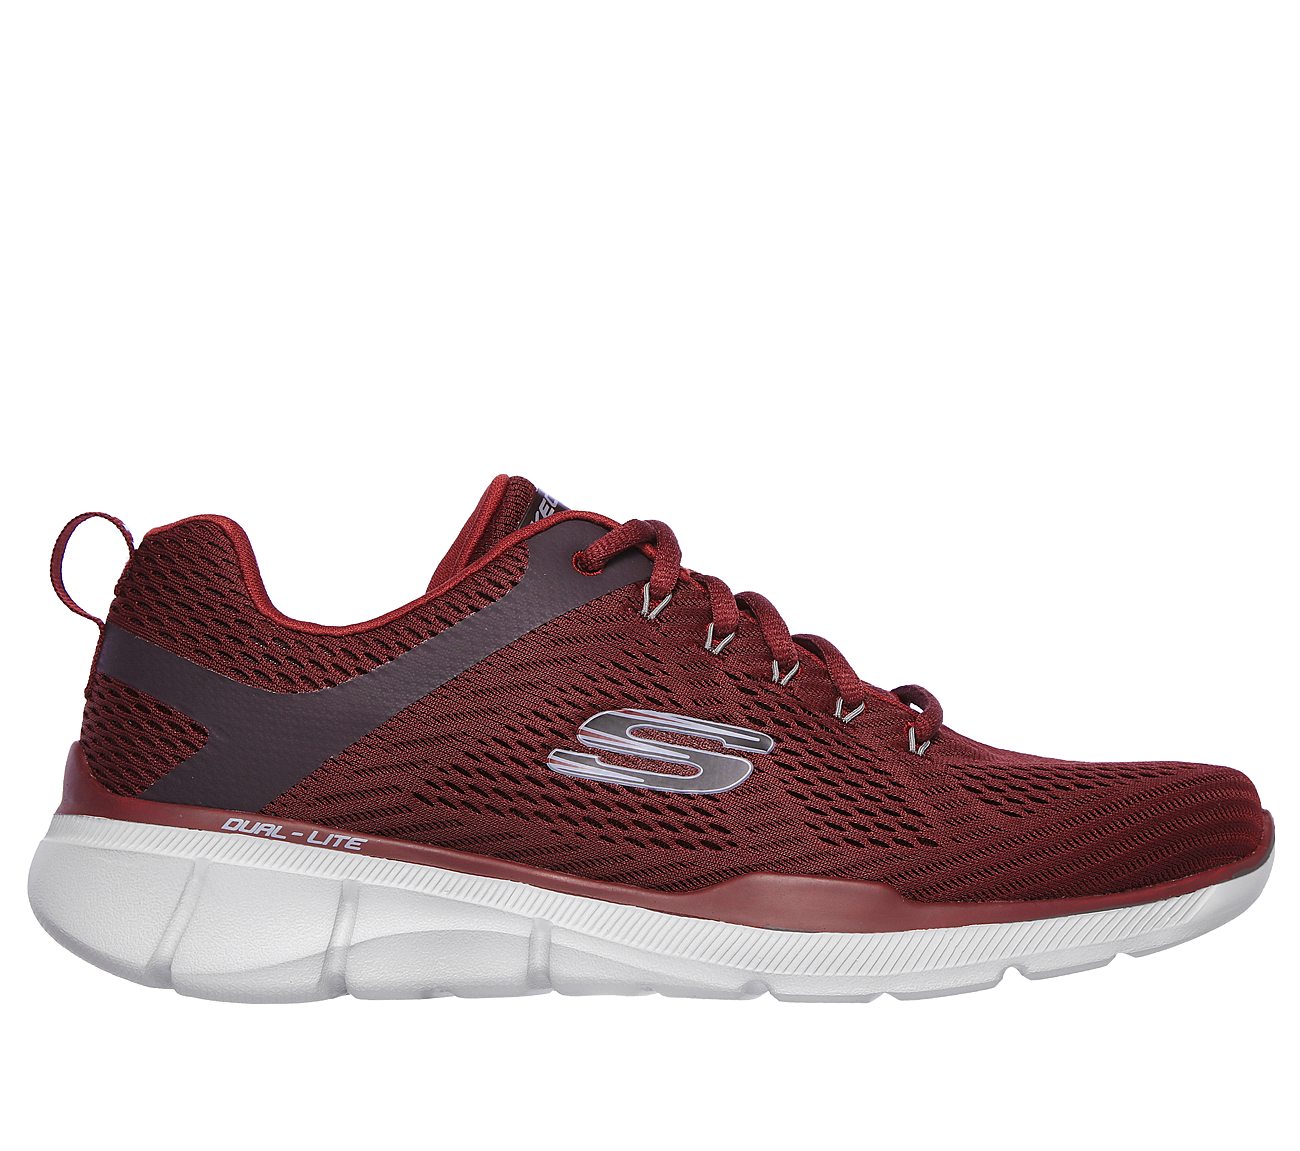 Buy SKECHERS Relaxed Fit: Equalizer 3.0 Sport Shoes